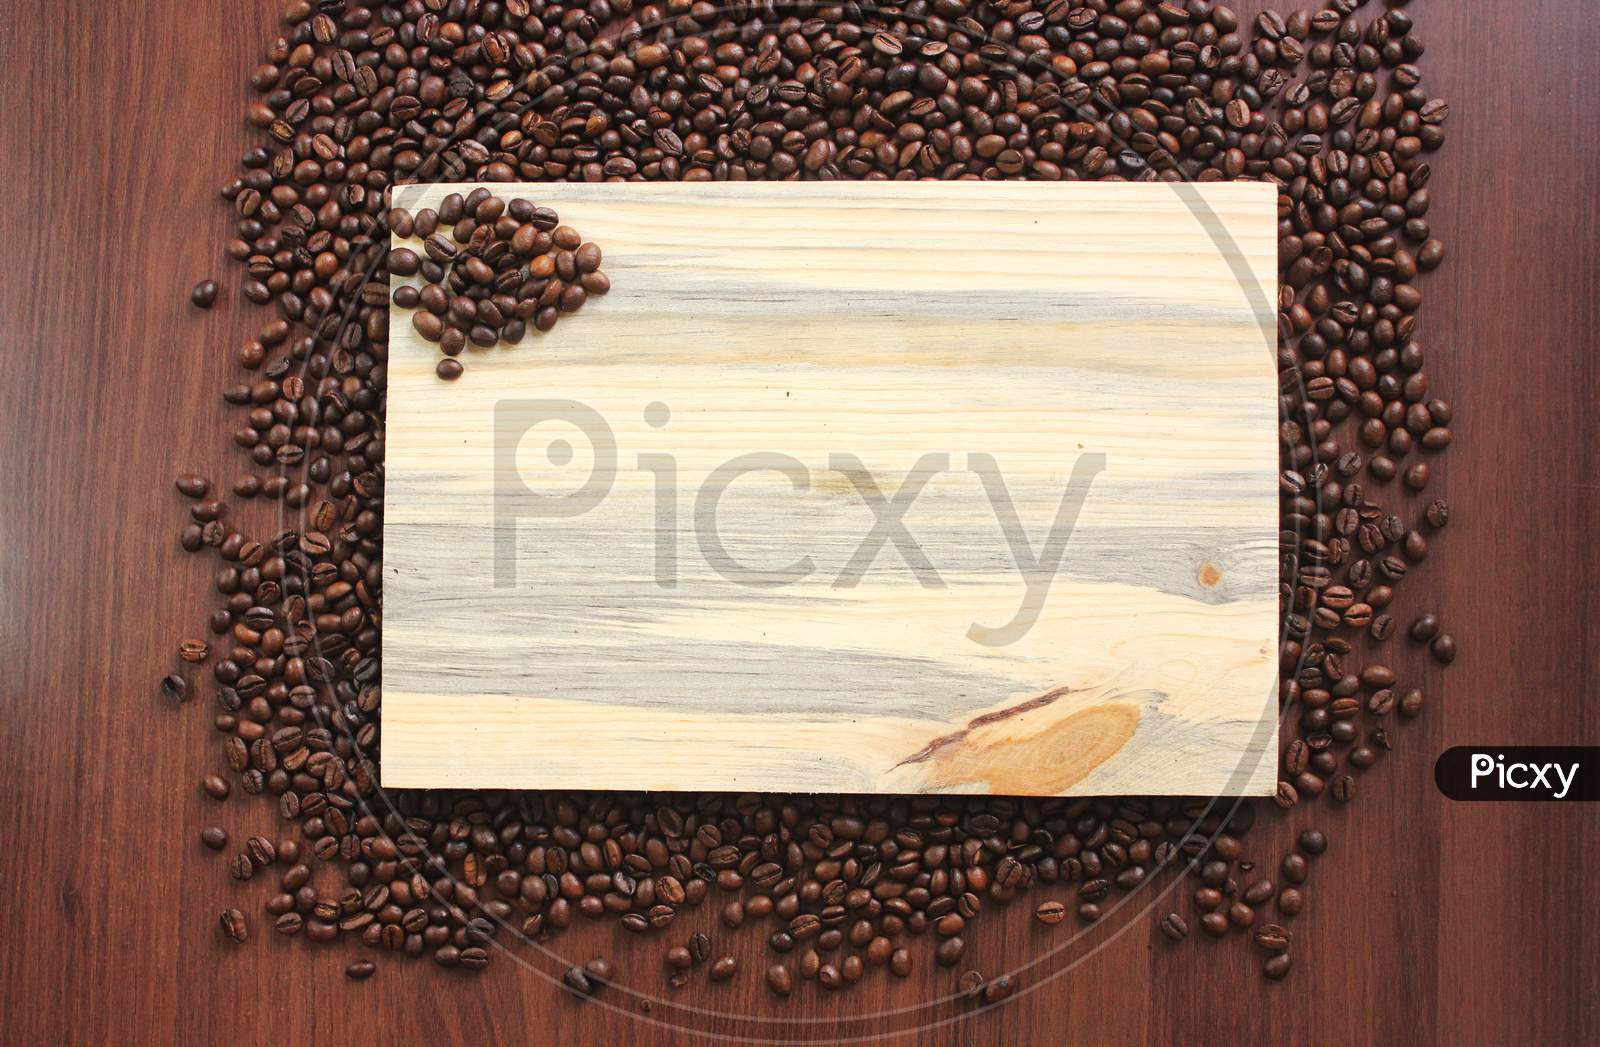 Closeup Of Roasted Coffee Beans Stock Photo